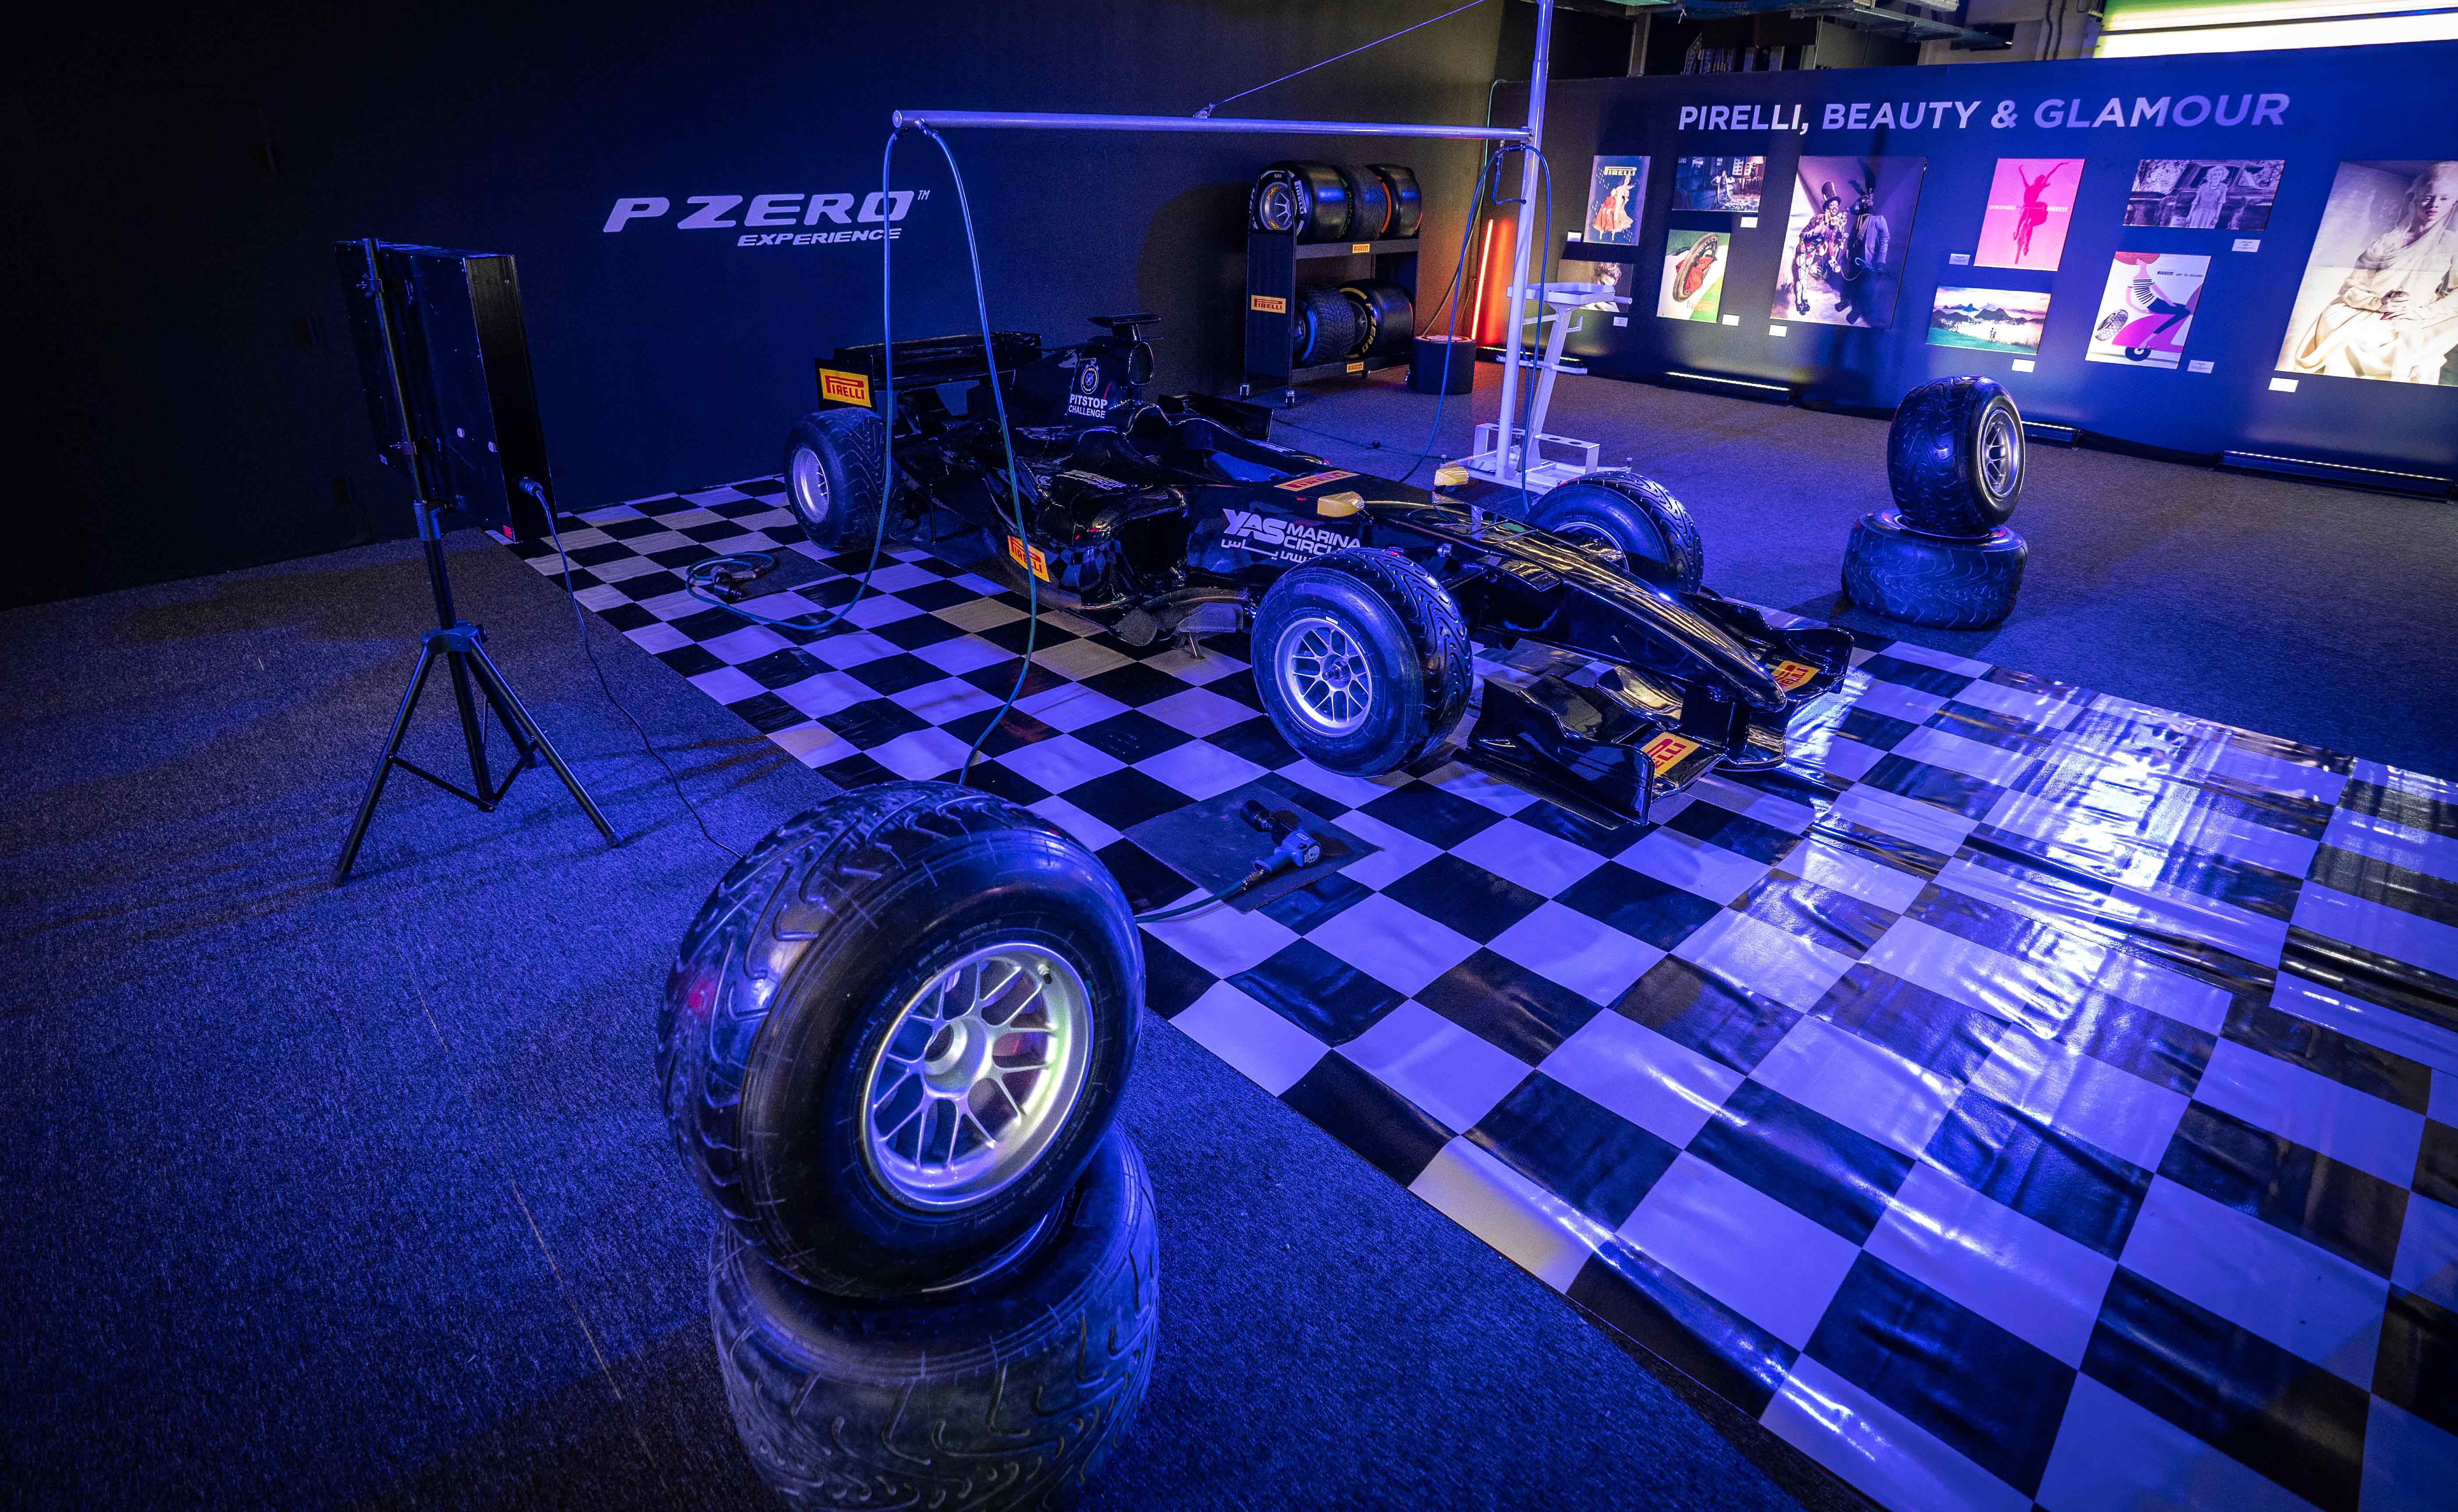 Pirelli Kick-Starts the Year with an Adrenaline-Filled Day at P ZERO™ Experience